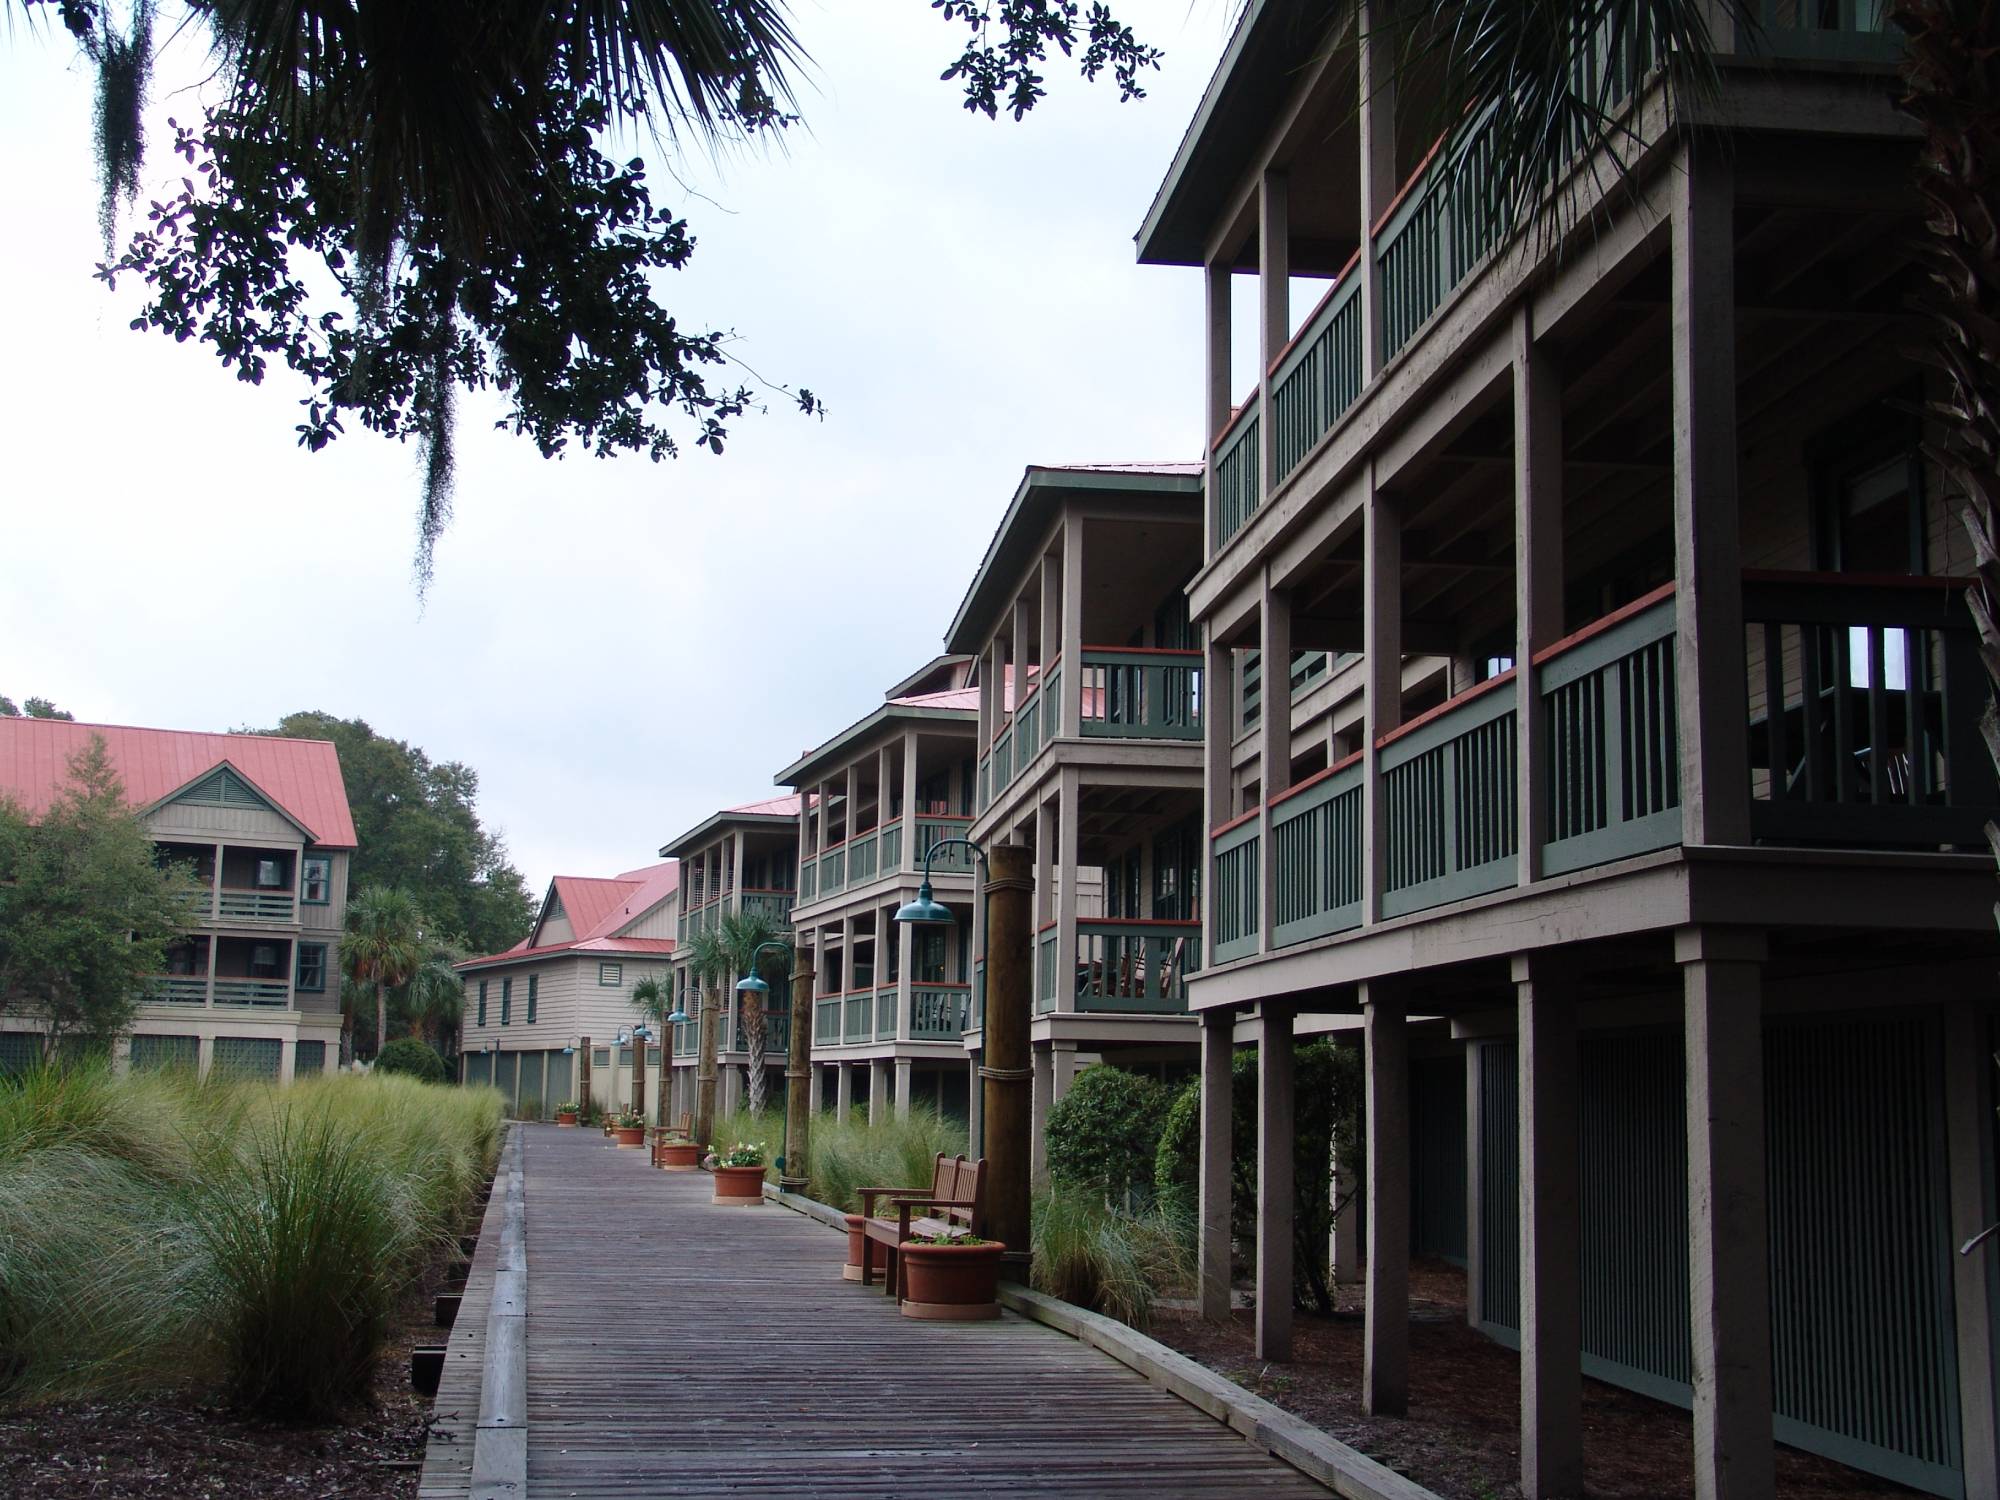 Hilton Head Island - view of the buildings